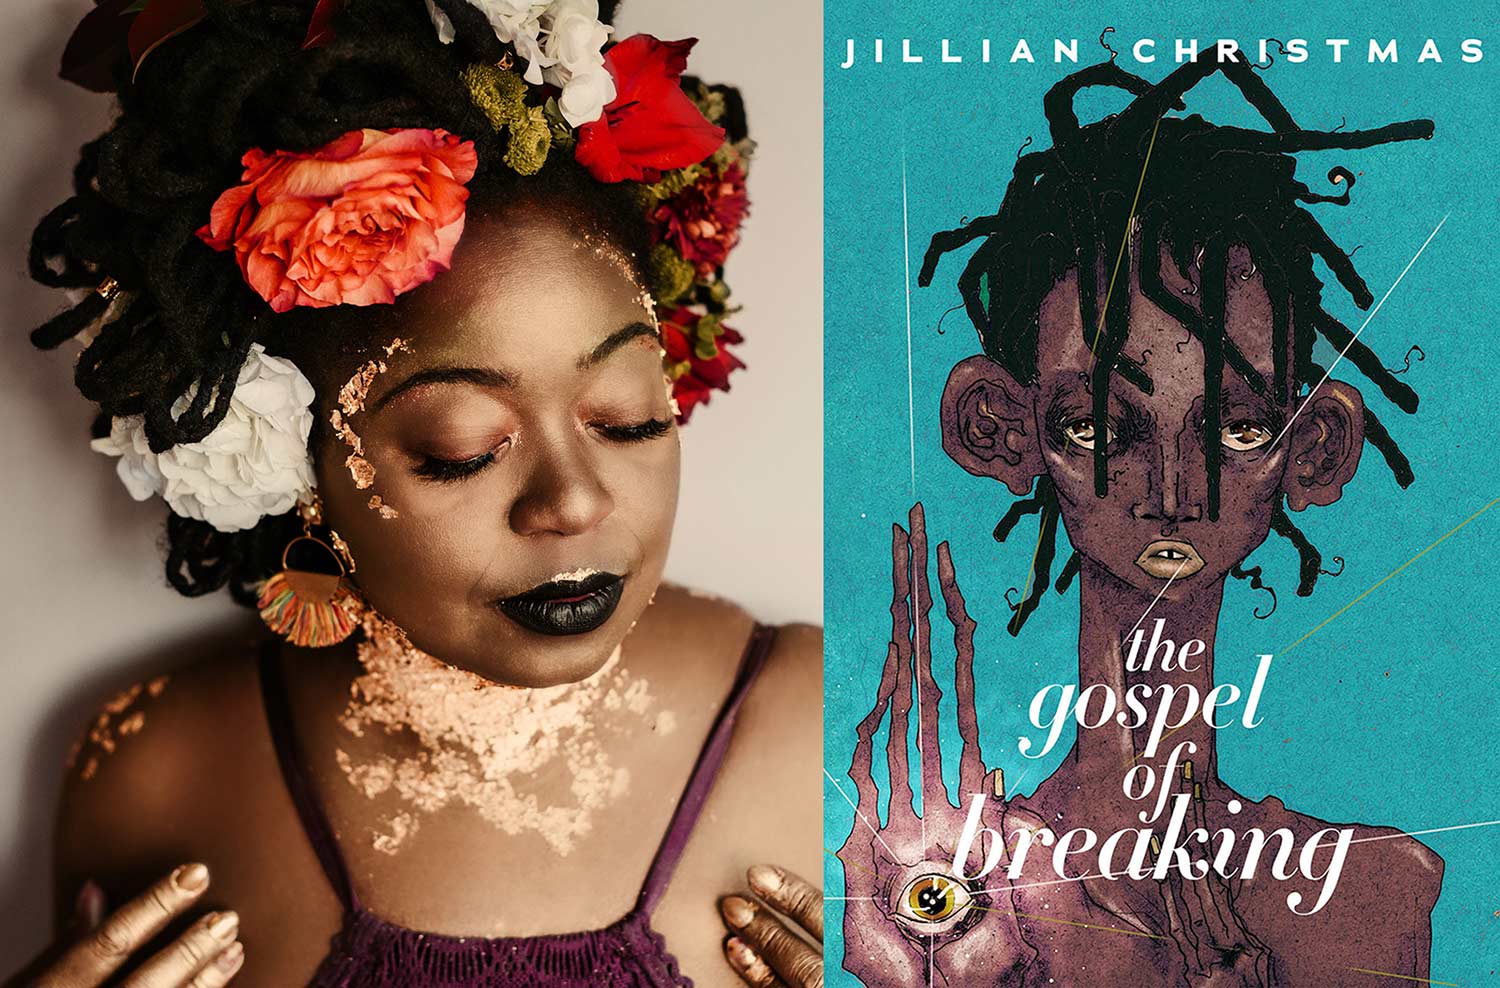 Picture of Jillian on the left with artful makeup on her face and decolletage. She's wearing a flower crown made up of orange, red, and white flowers. She's looking down. To the left is the cover of her poetry collection.